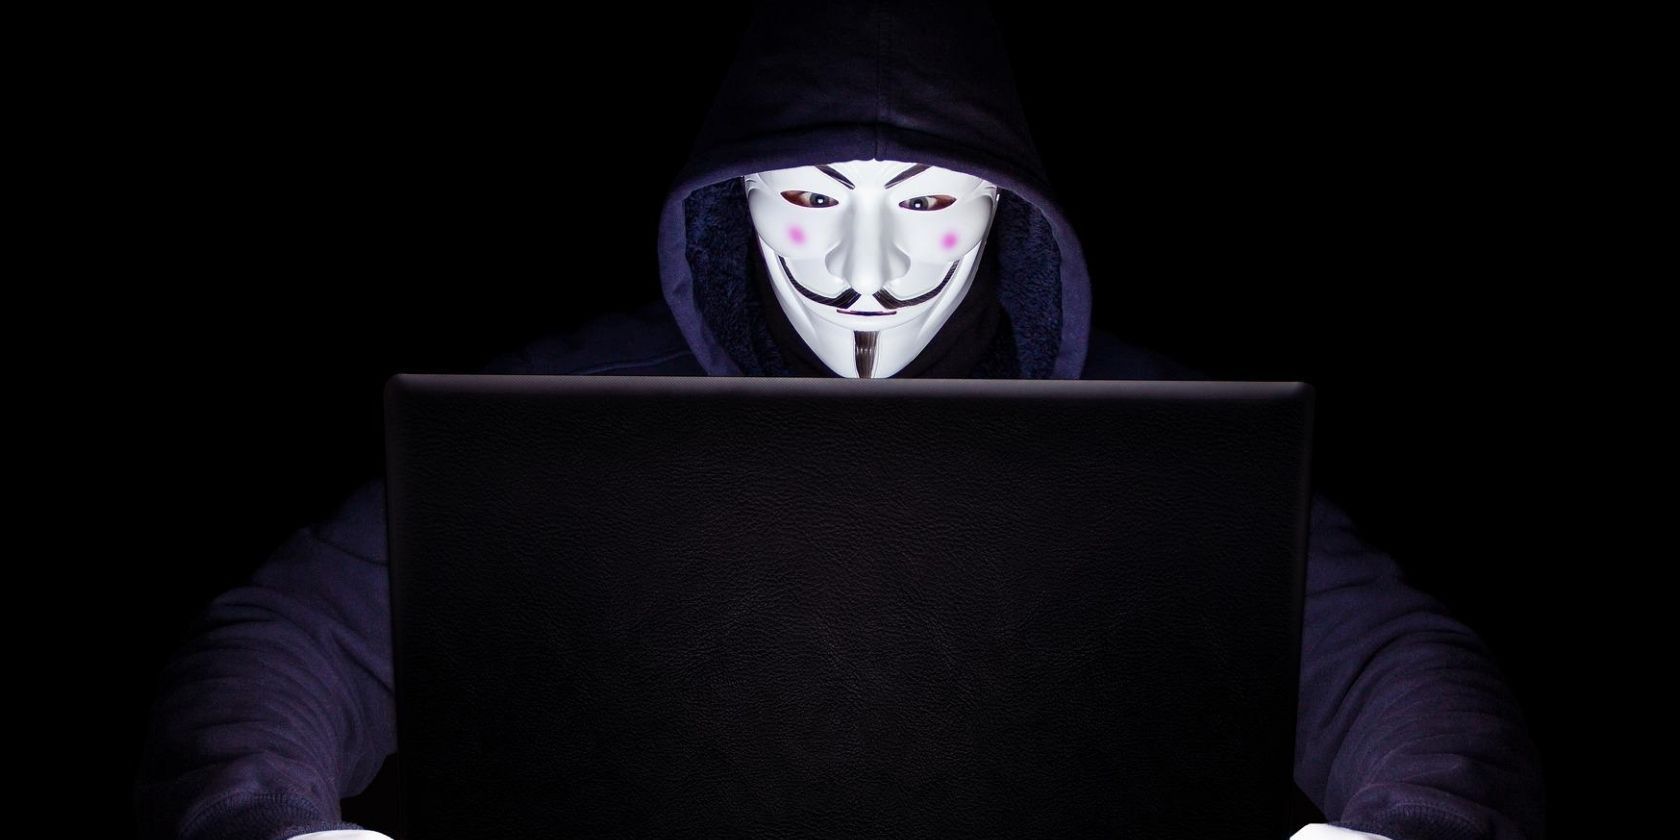 hooded person in mask looking at laptop